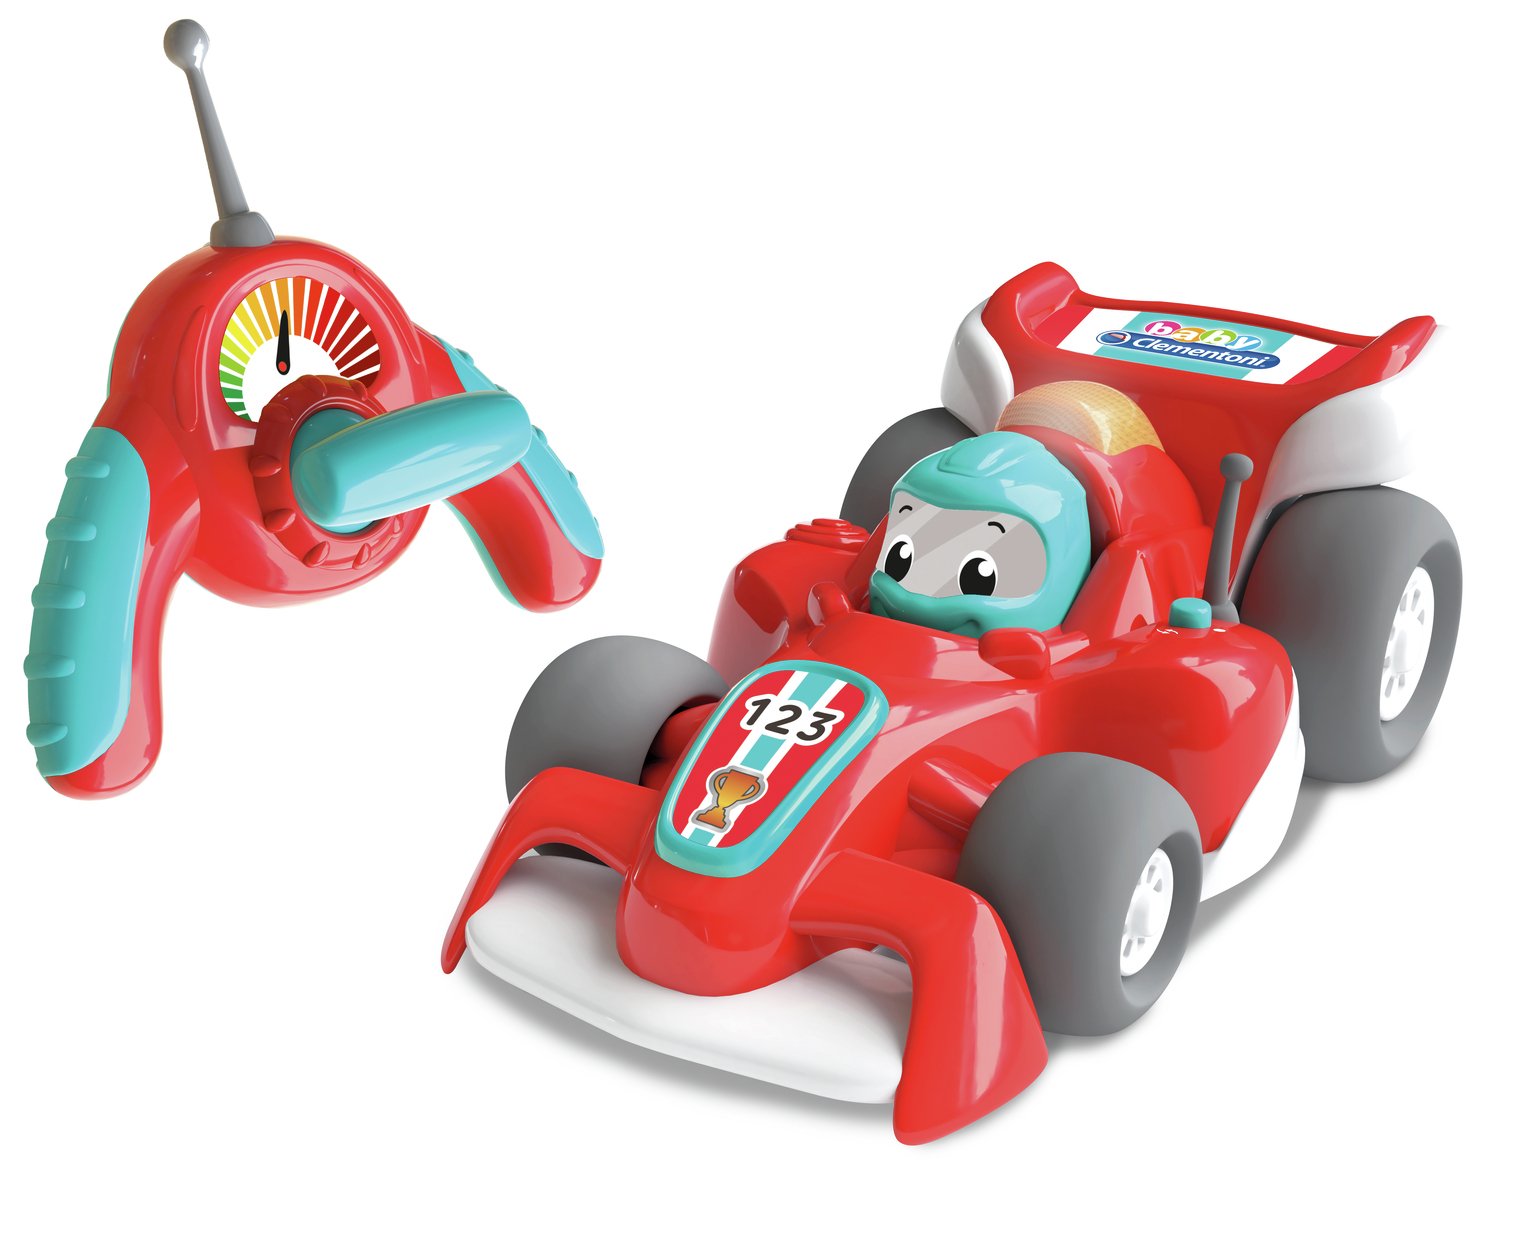 Baby Clementoni Lewis Radio Controlled Vehicle Review